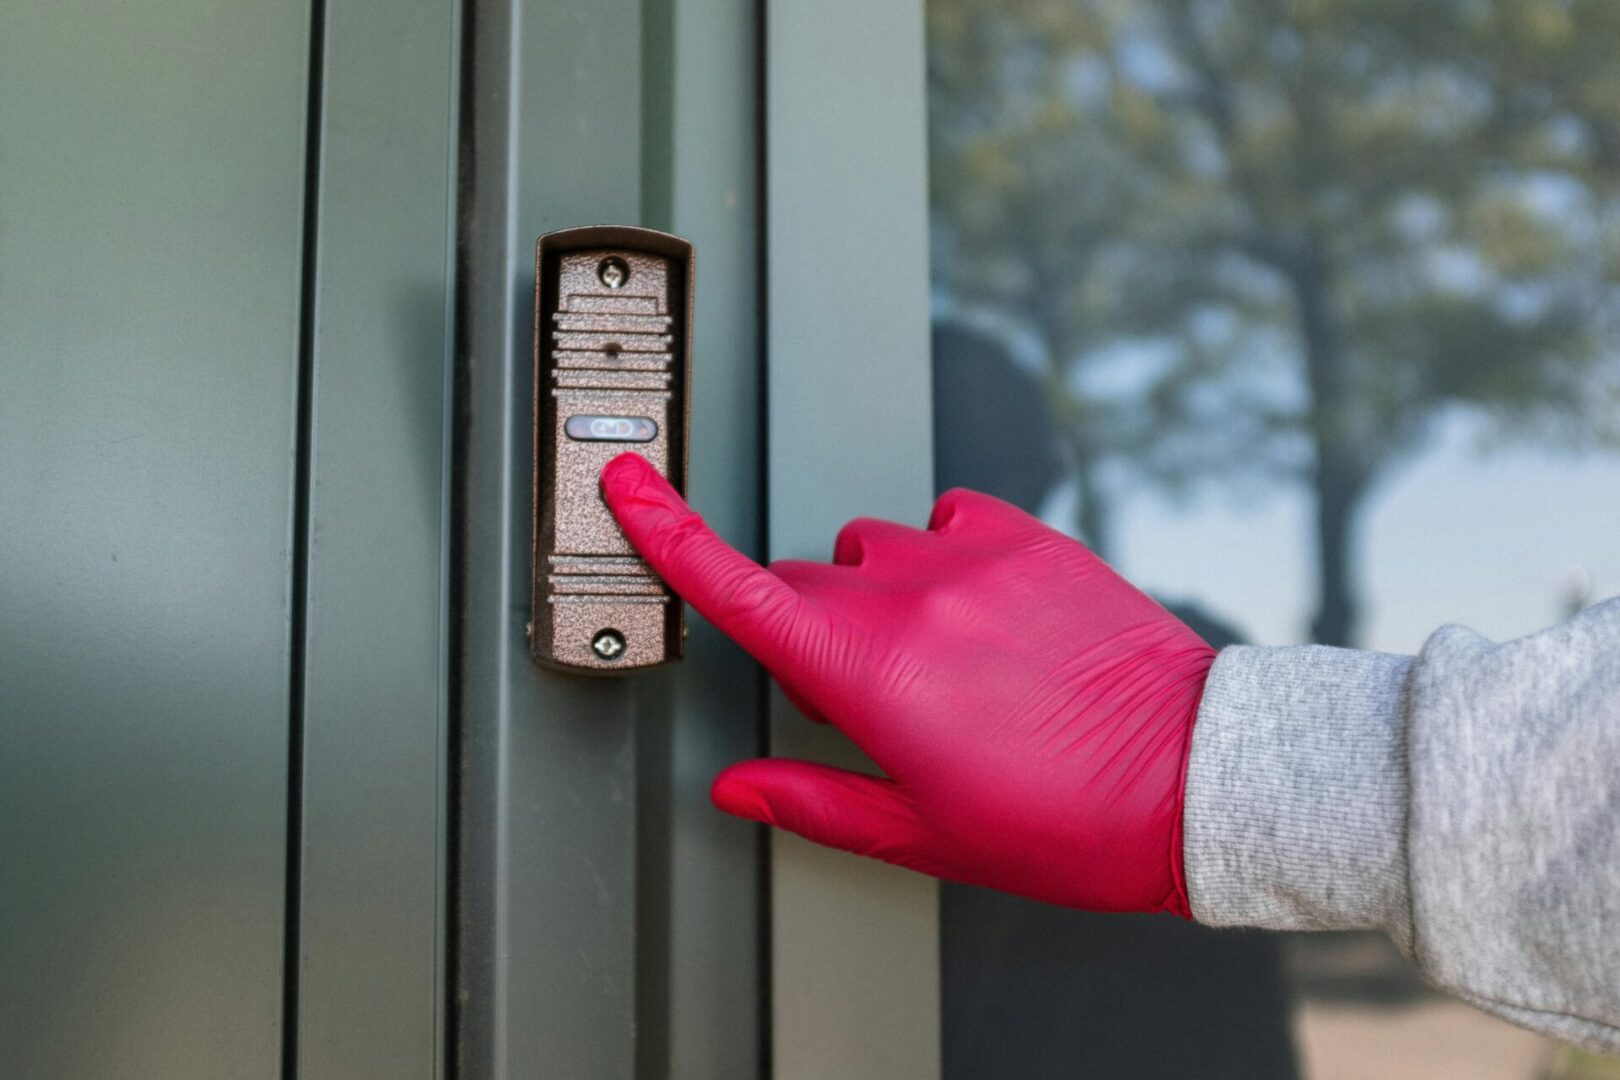 A person wearing gloves and using a door bell